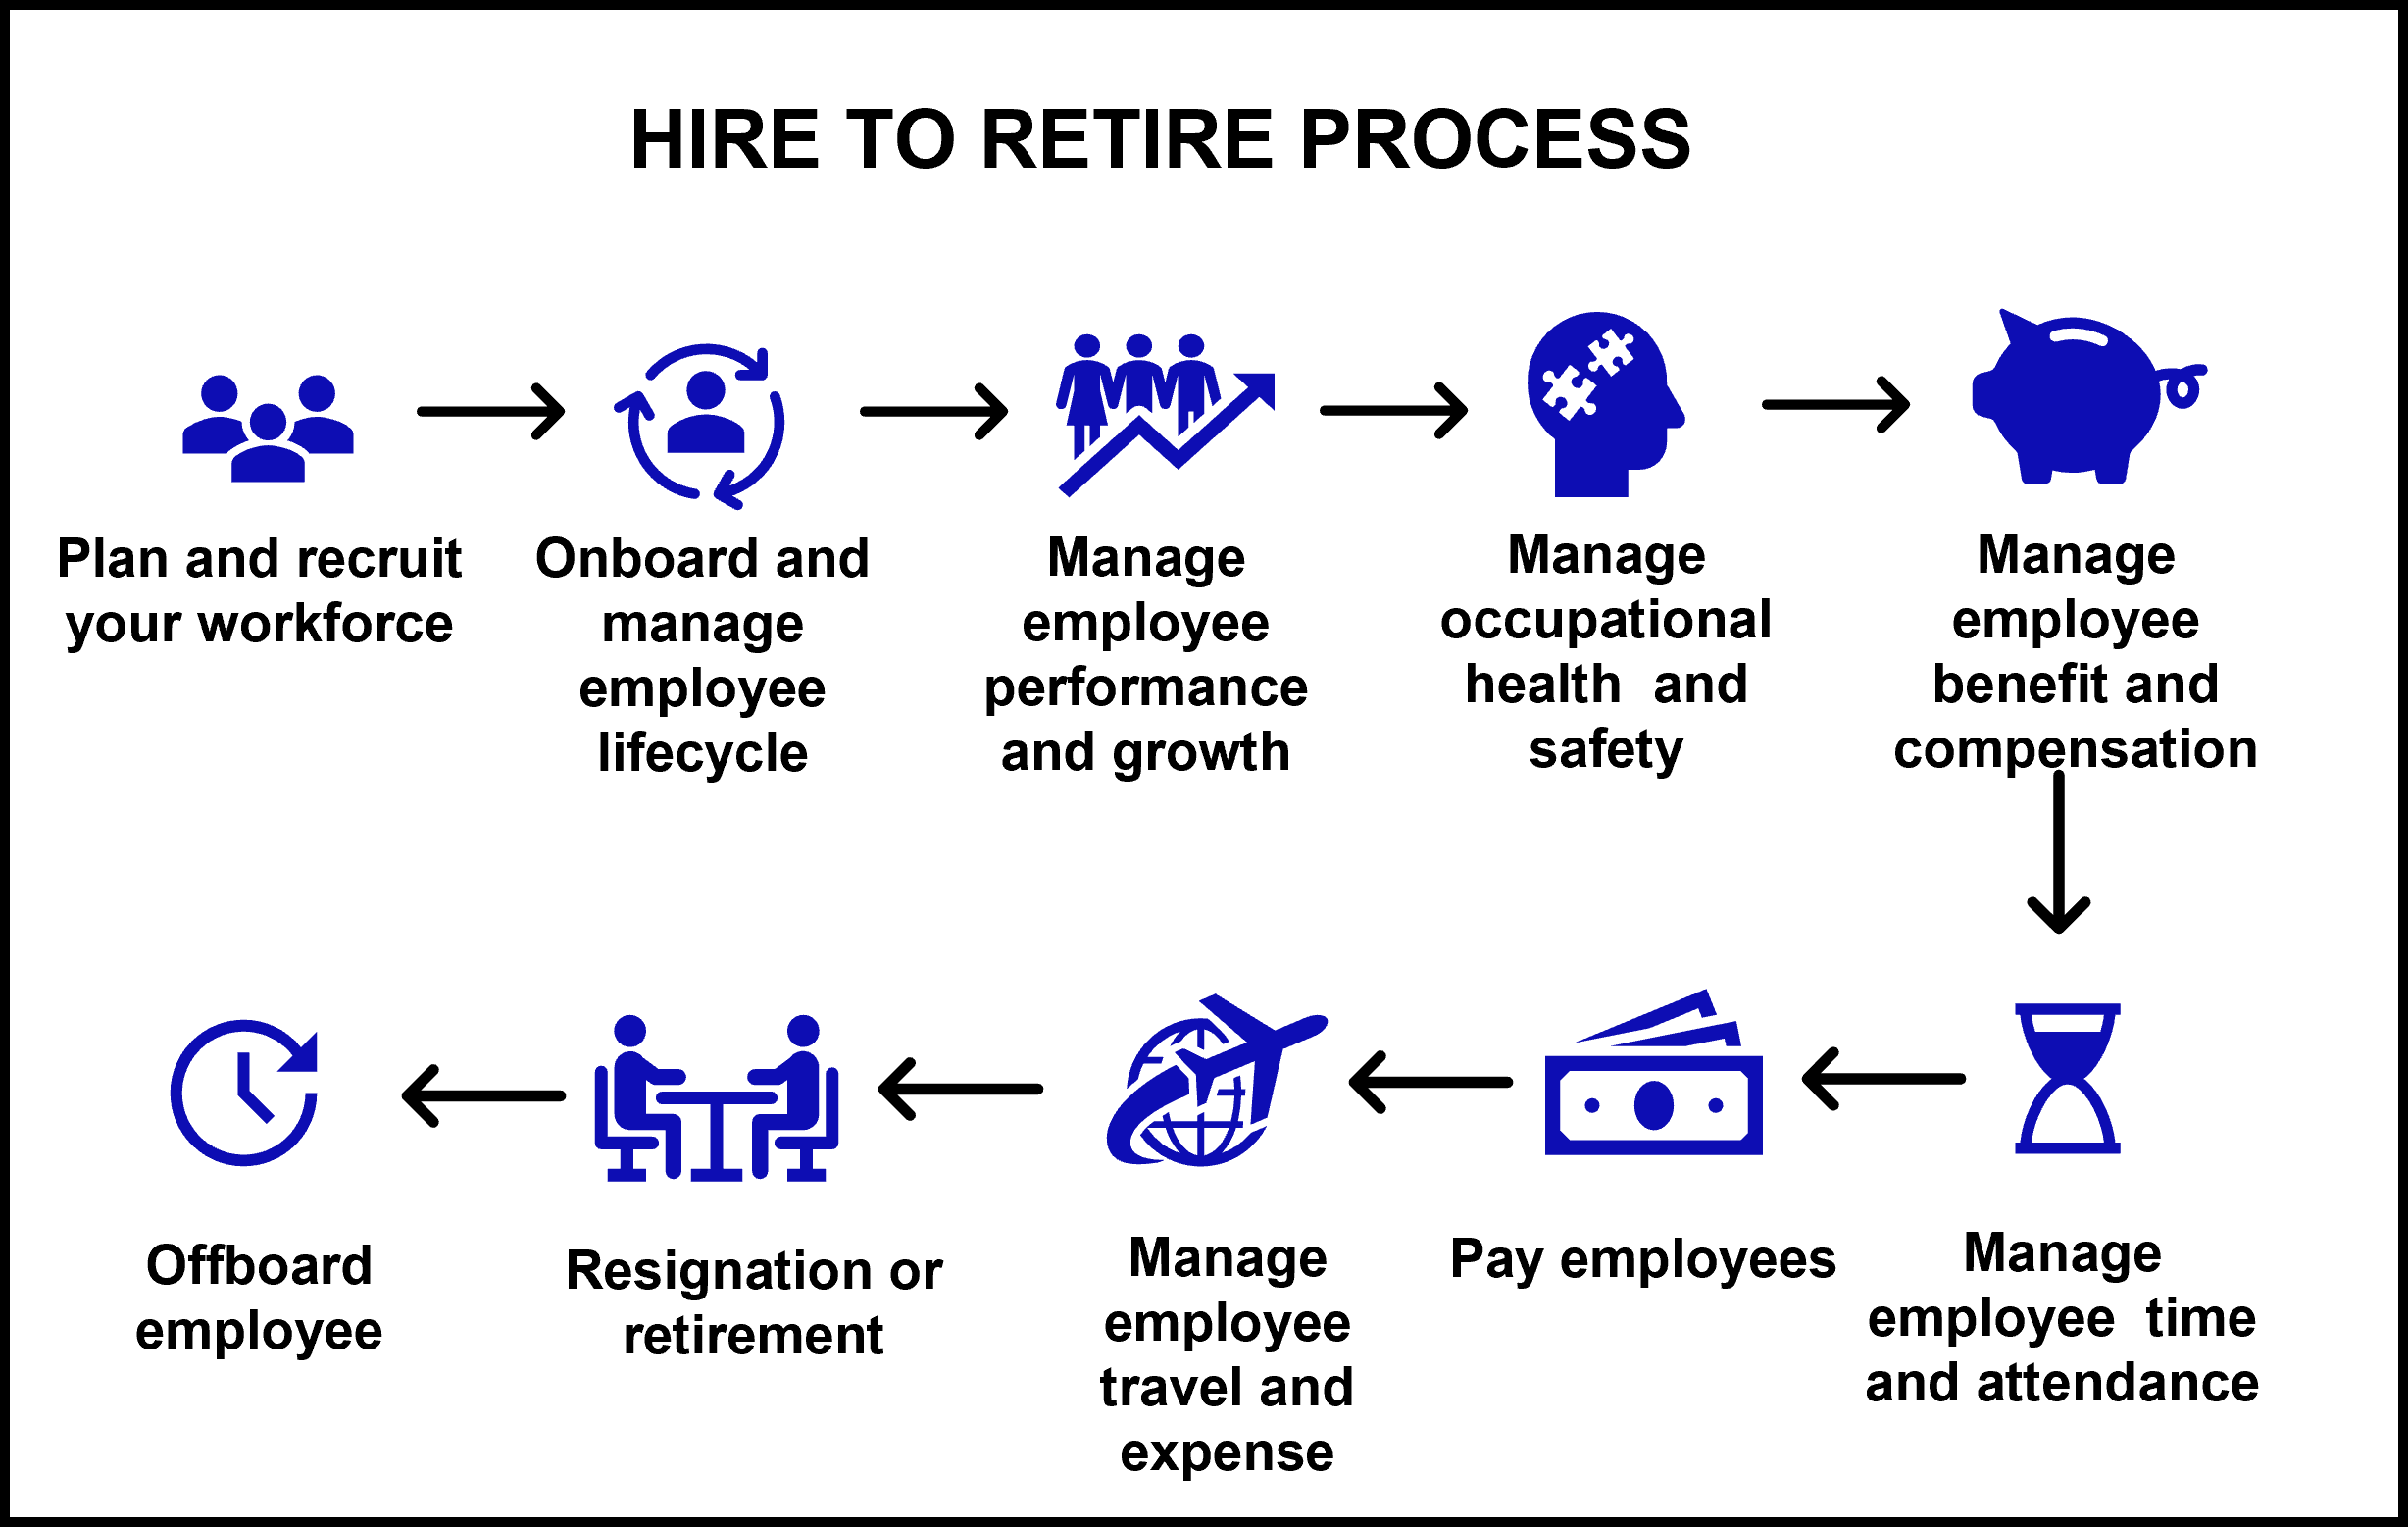 Diagram depicts the hire-to-retire process, with the following subprocesses:
• Plan and recruit your workforce
• Onboard and manage the employee lifecycle
• Manage employee performance and growth
• Manage occupational health and safety
• Manage employee benefits and compensation
• Manage employee time and attendance
• Pay employees
• Manage employee travel and expense
• Resignation or retirement
• Offboard employee
